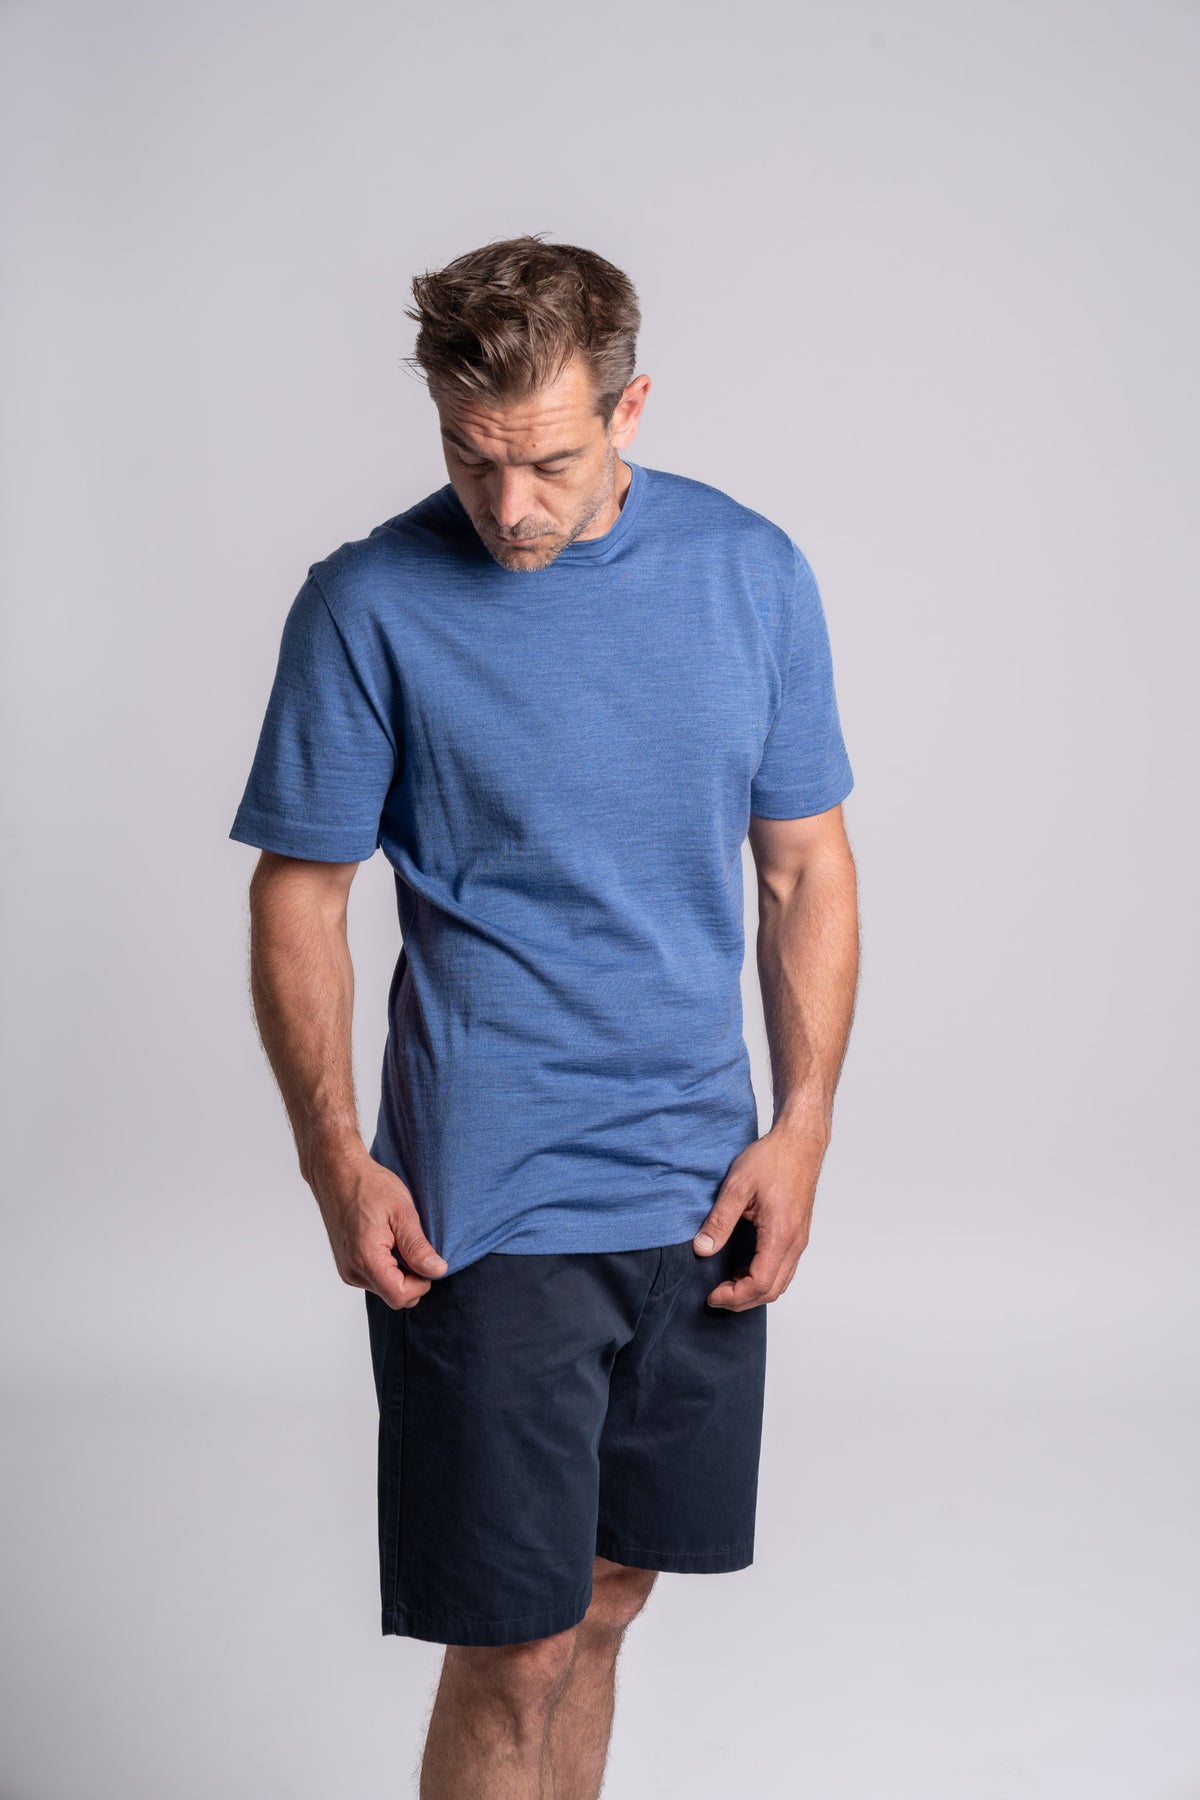 Model wearing Merino Featherweight T-shirt Sky Blue Front View